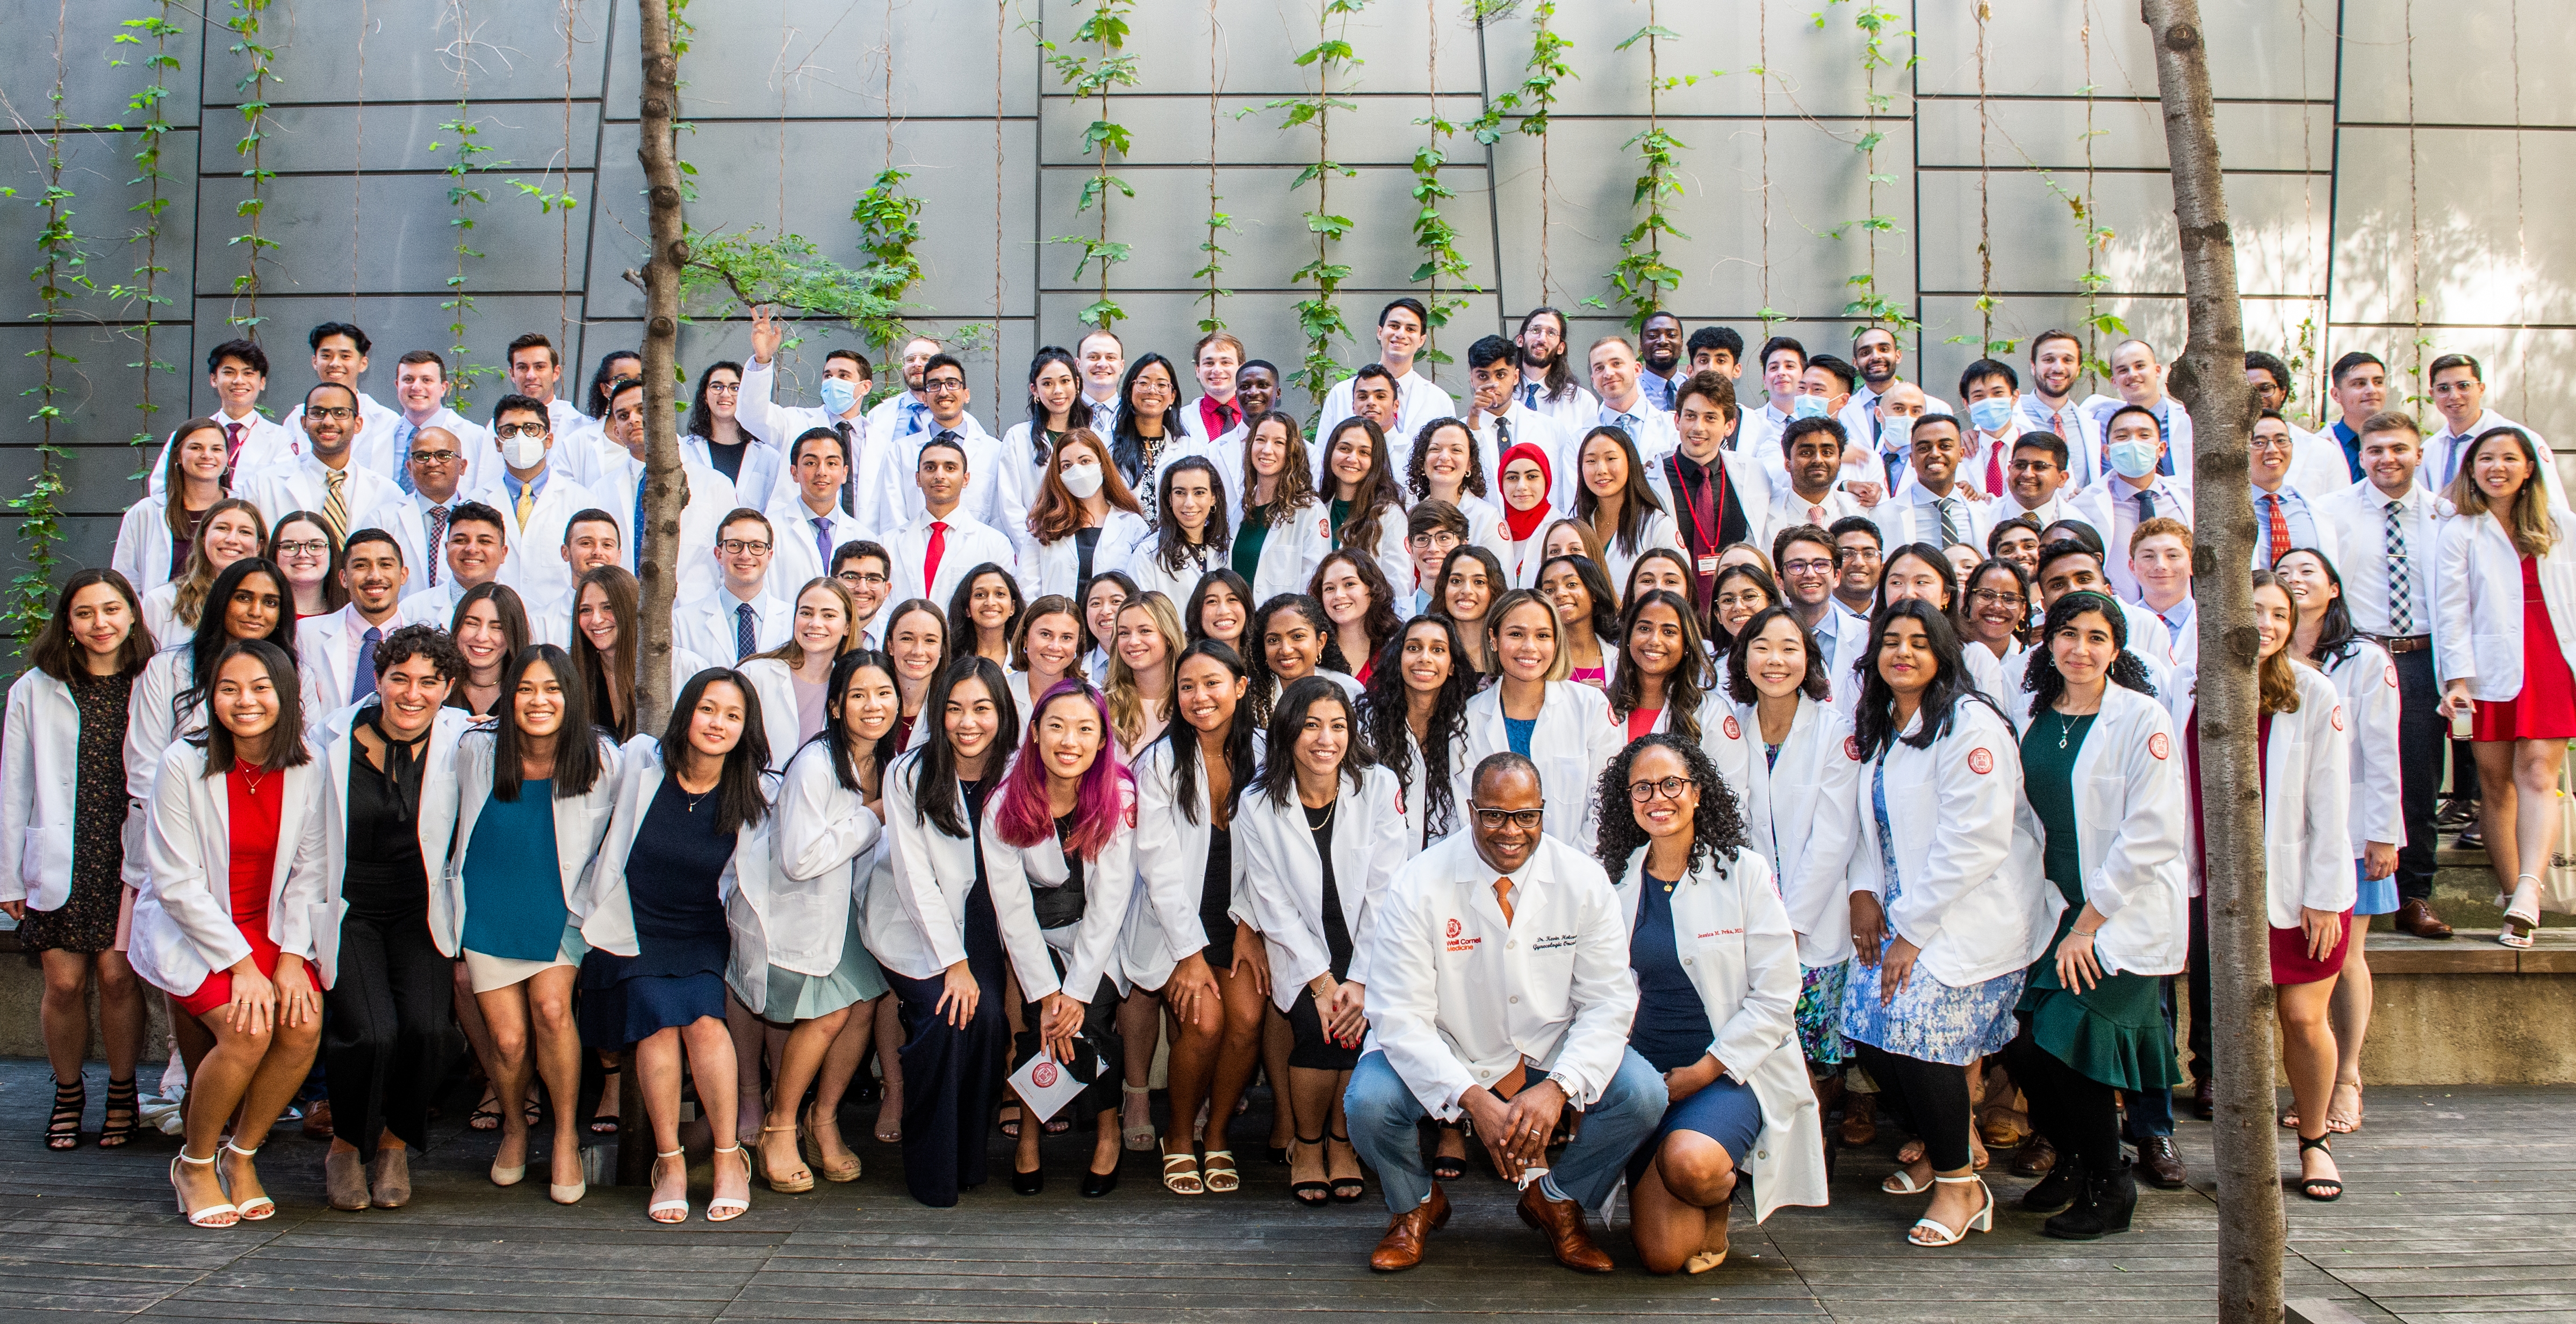 The Class of 2026 at Weill Cornell Medicine's annual White Coat ceremony on August 16, 2022.  All photos by Studio Brooke.